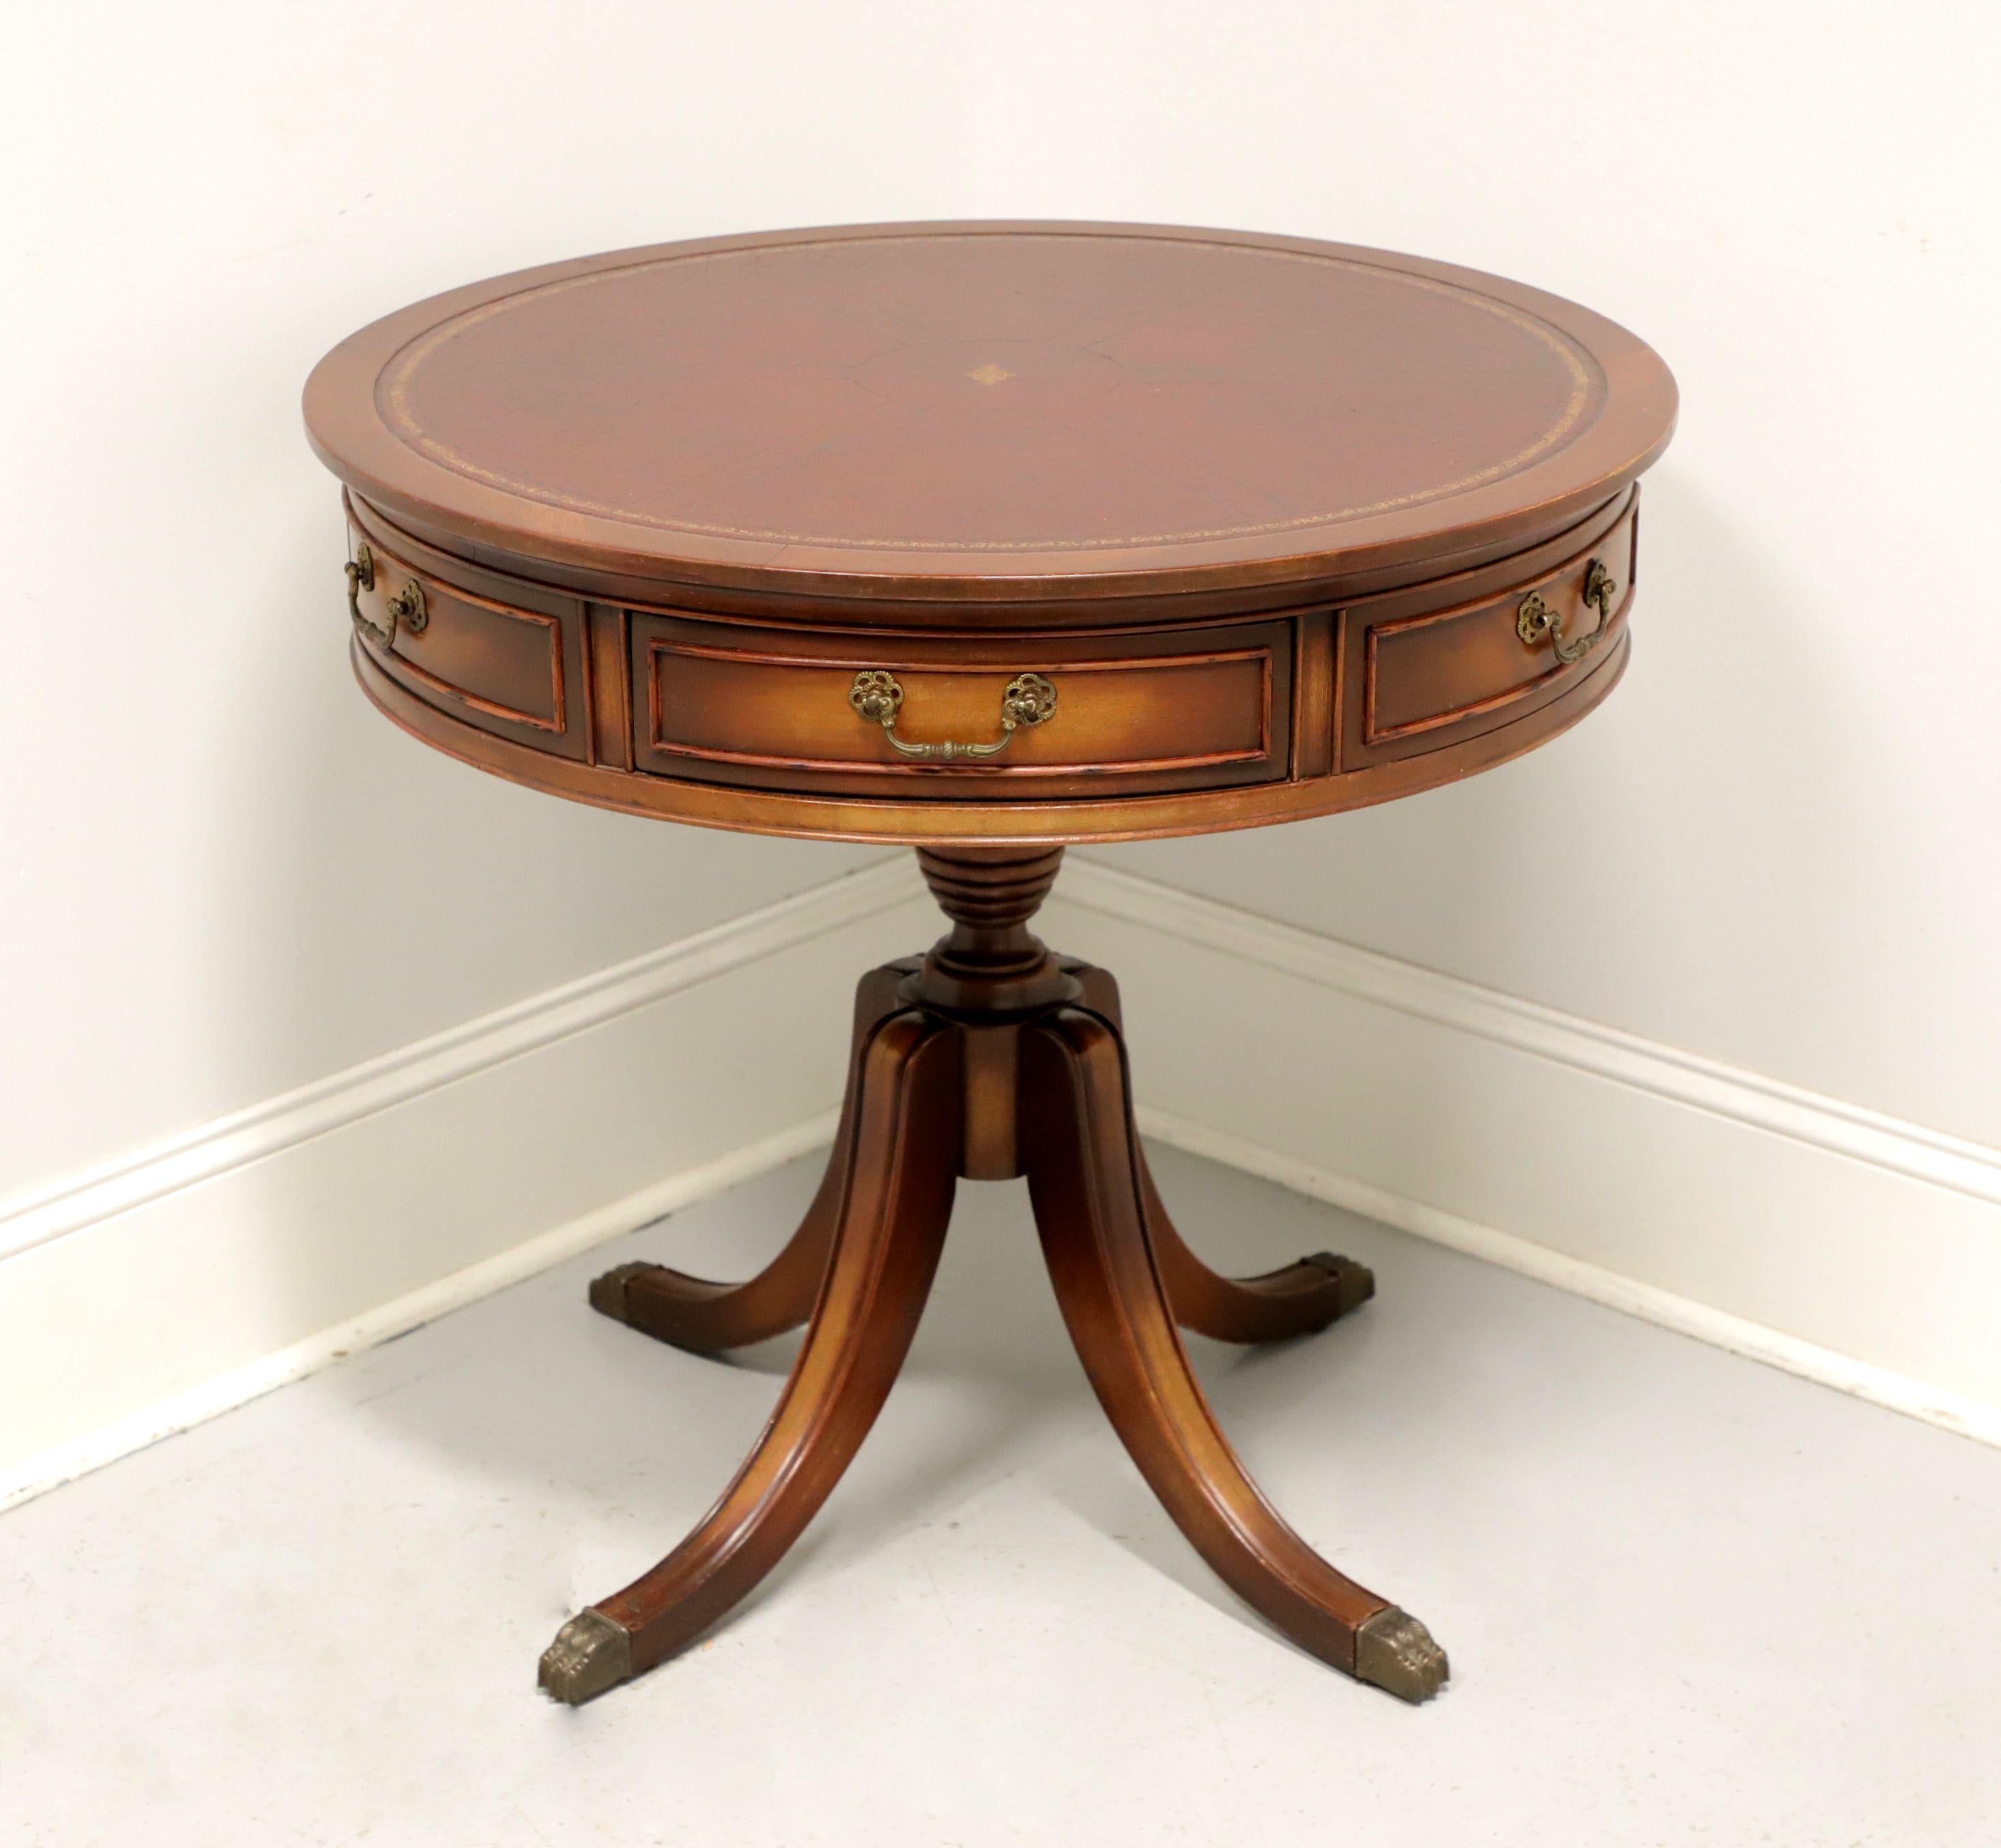 A Traditional style round drum table by Gordon's Furniture, of Johnson City, Tennessee, USA. Mahogany with banded & inlaid reddish-brown with gold band leather top, brass hardware, turned pedestal base and four legs with brass toe caps. Features two